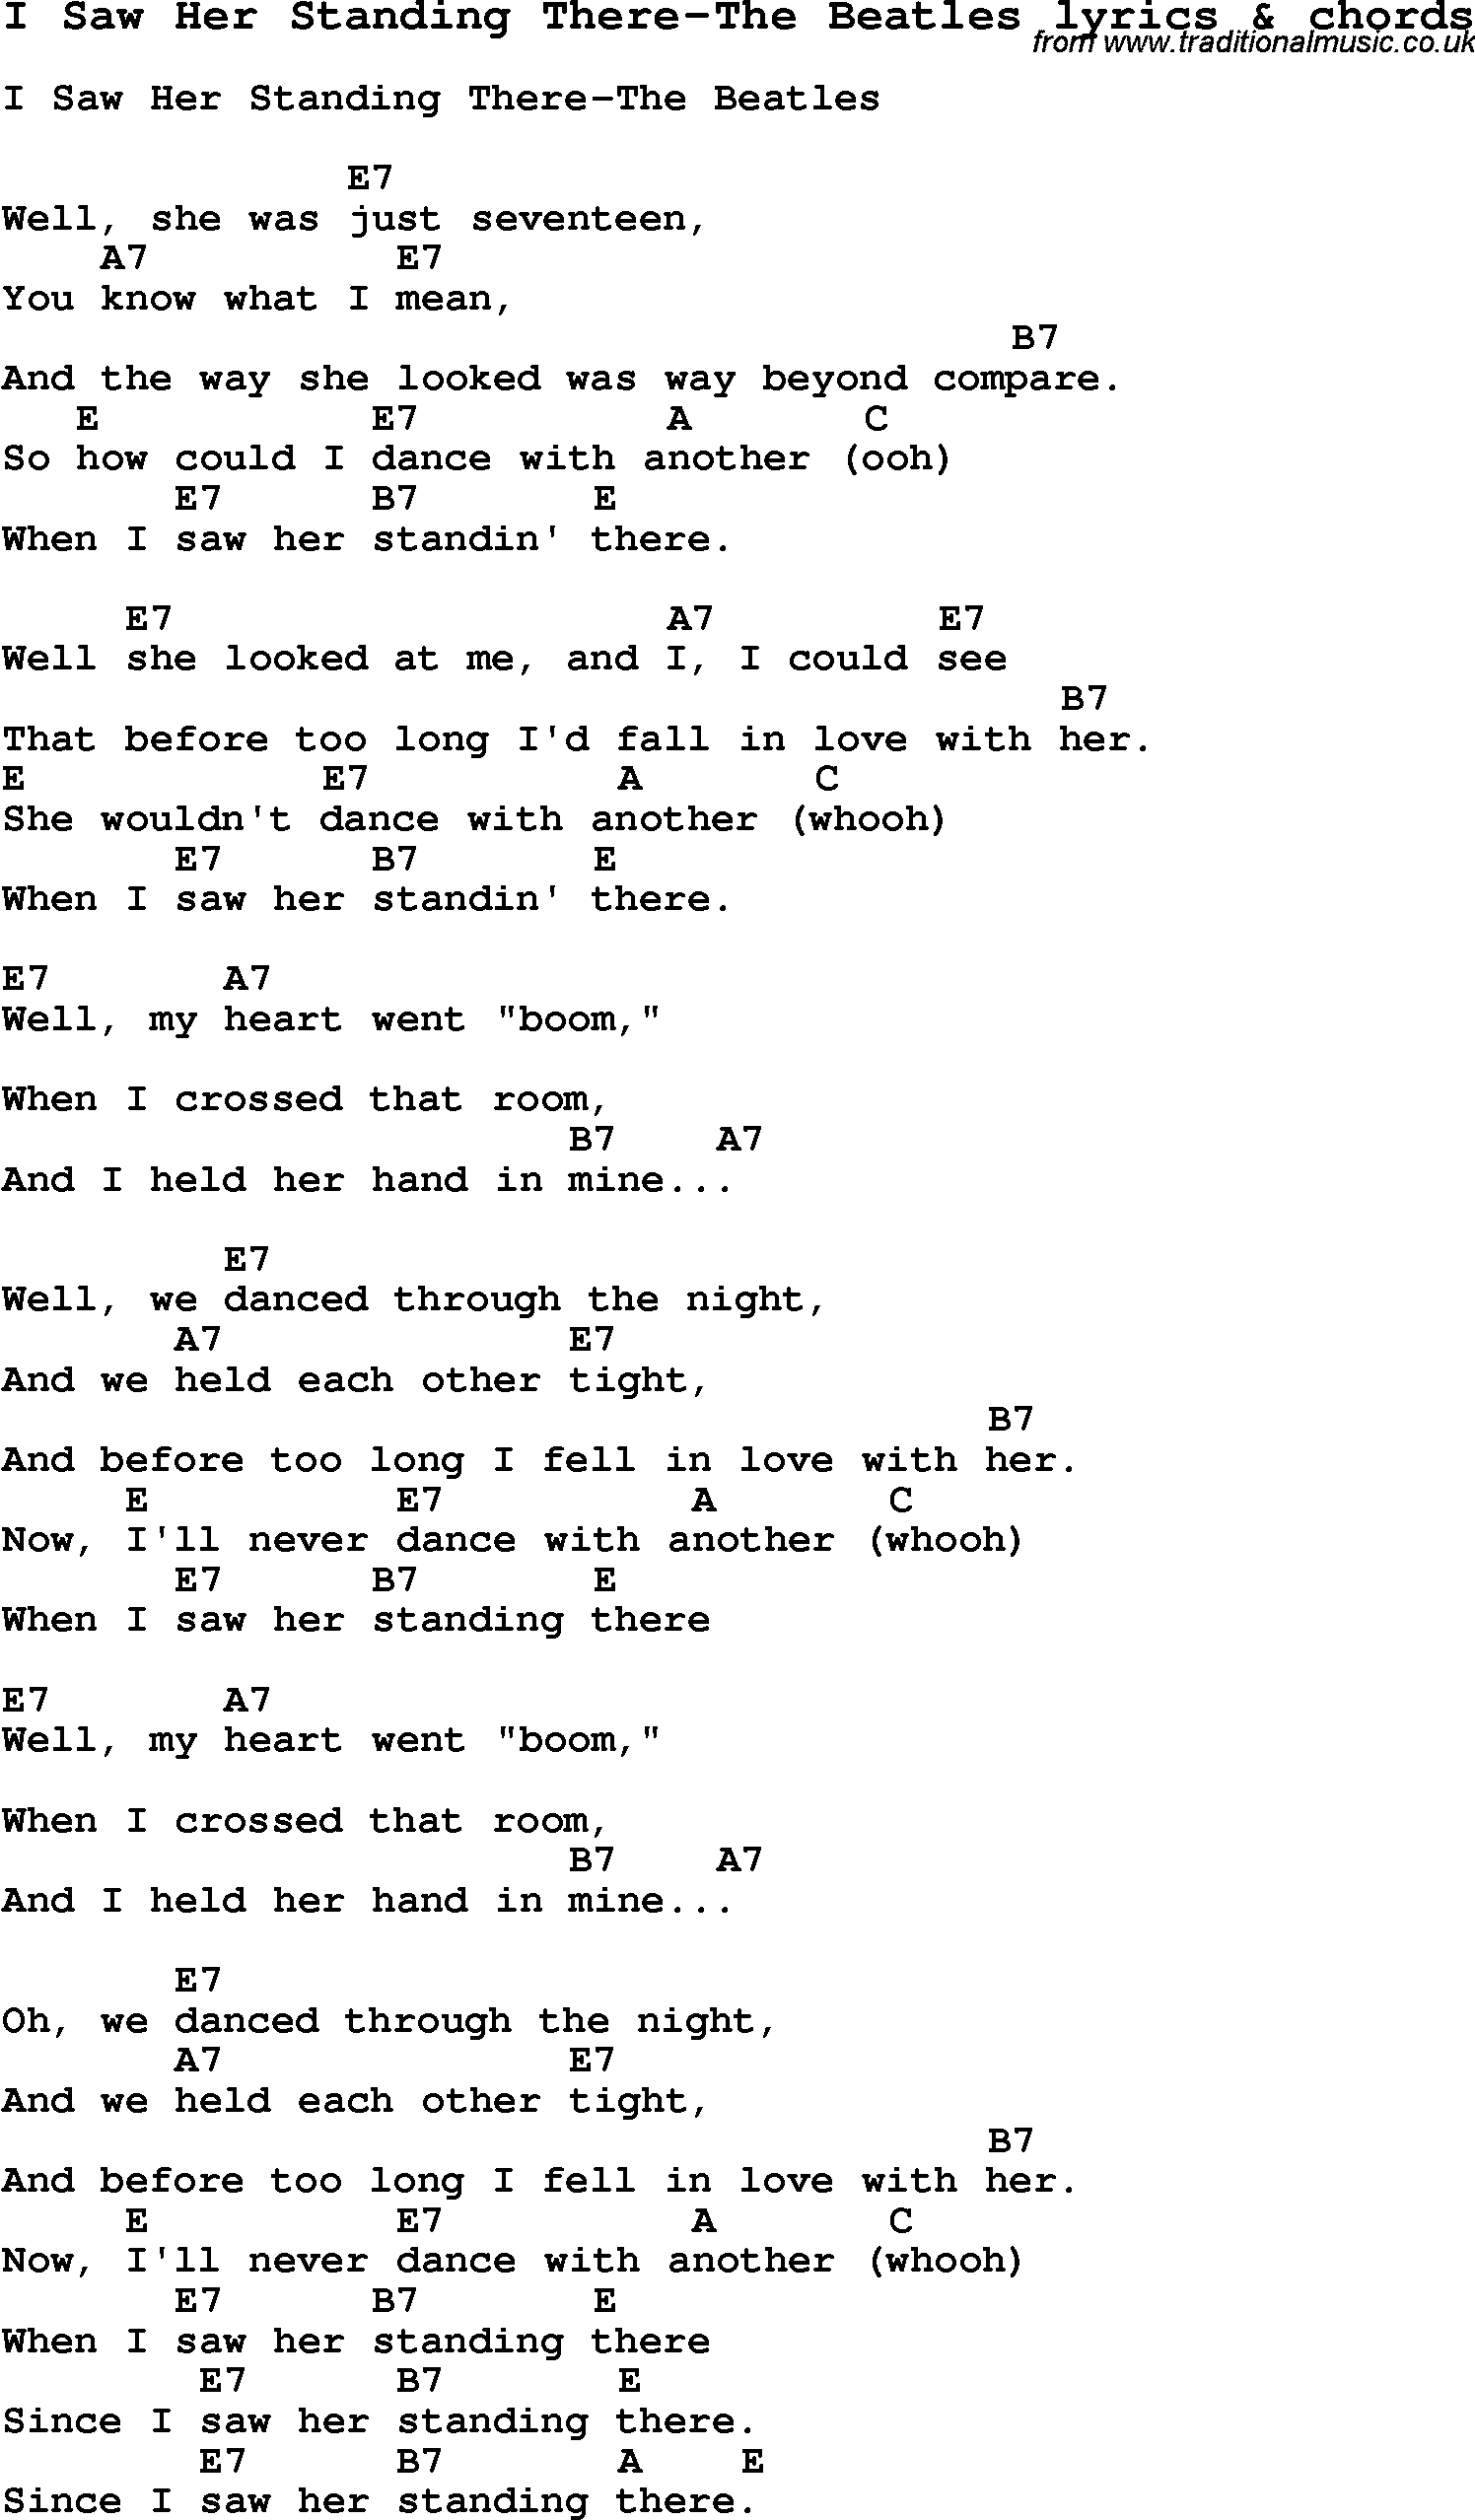 Love Song Lyrics for: I Saw Her Standing There-The Beatles with chords for Ukulele, Guitar Banjo etc.